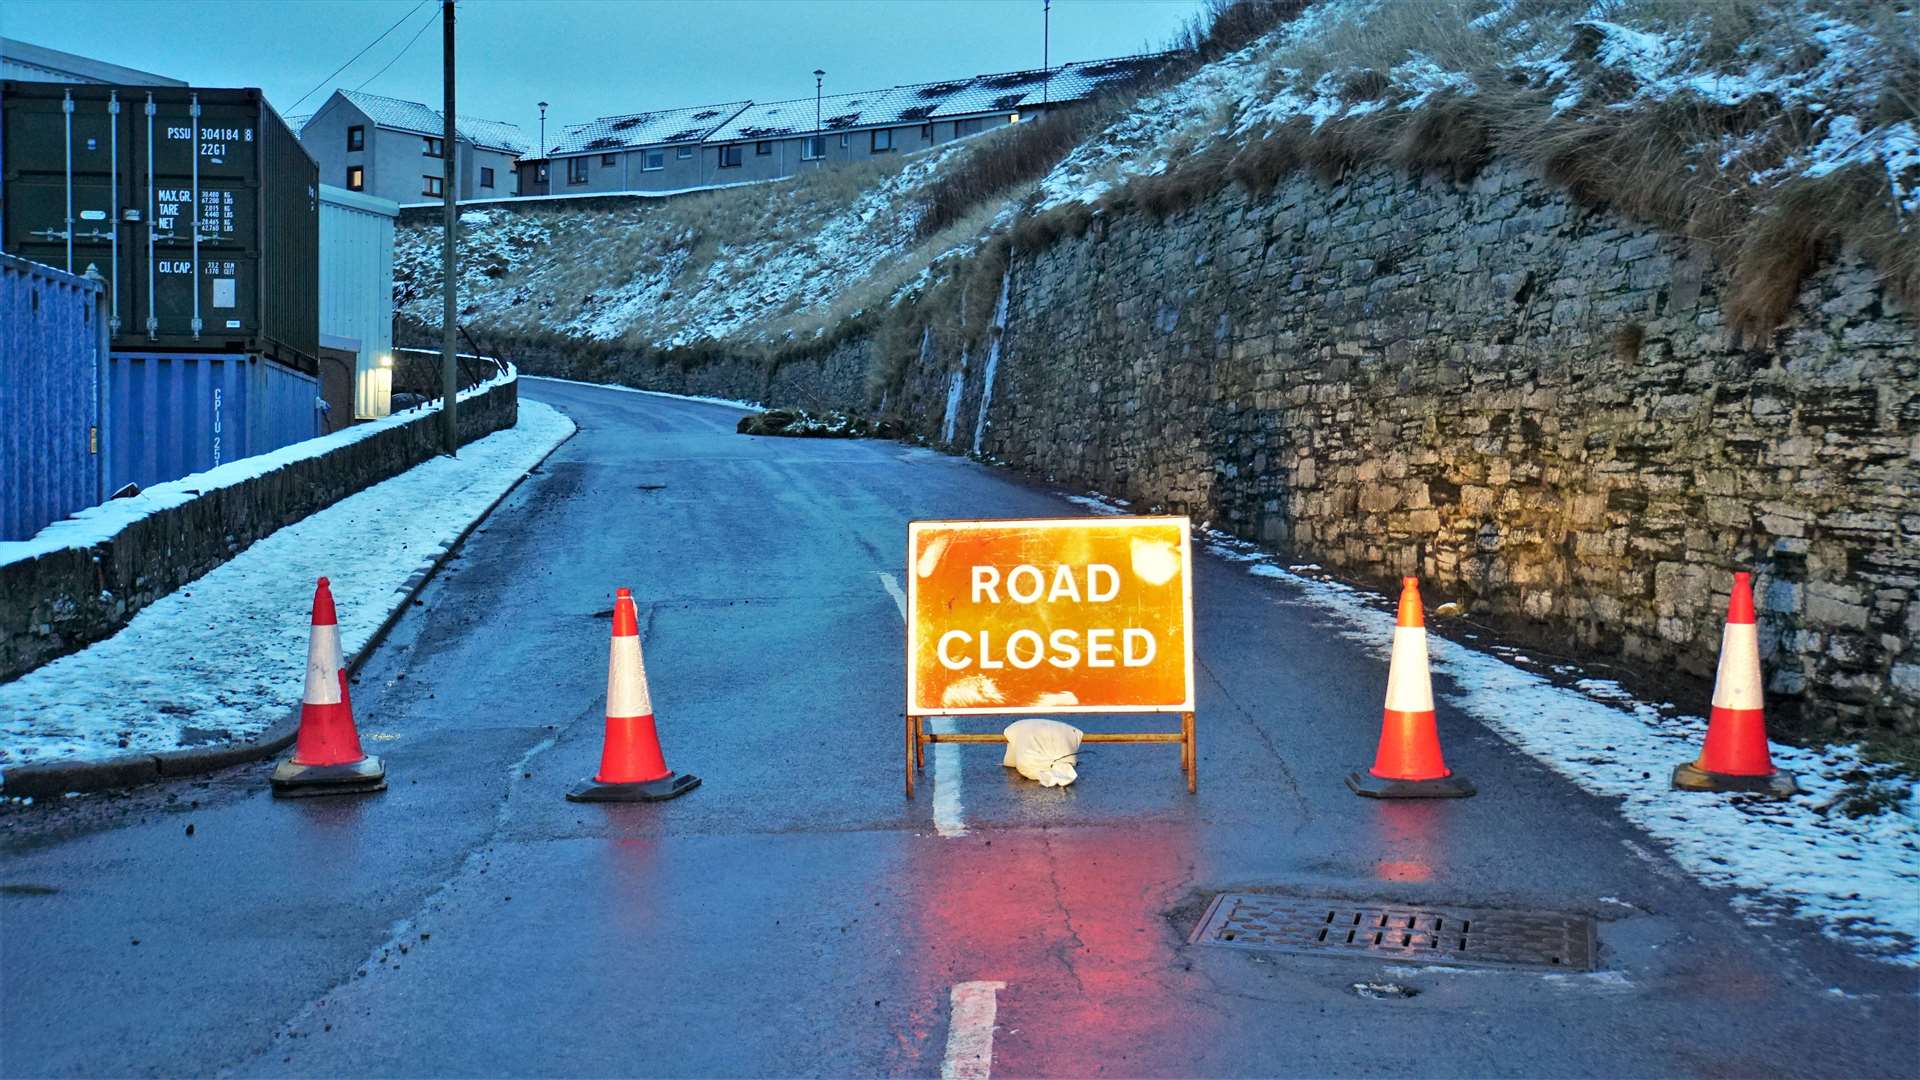 Harbour Road was closed off due to a landslide on Sunday but is now cleared. Picture: DGS